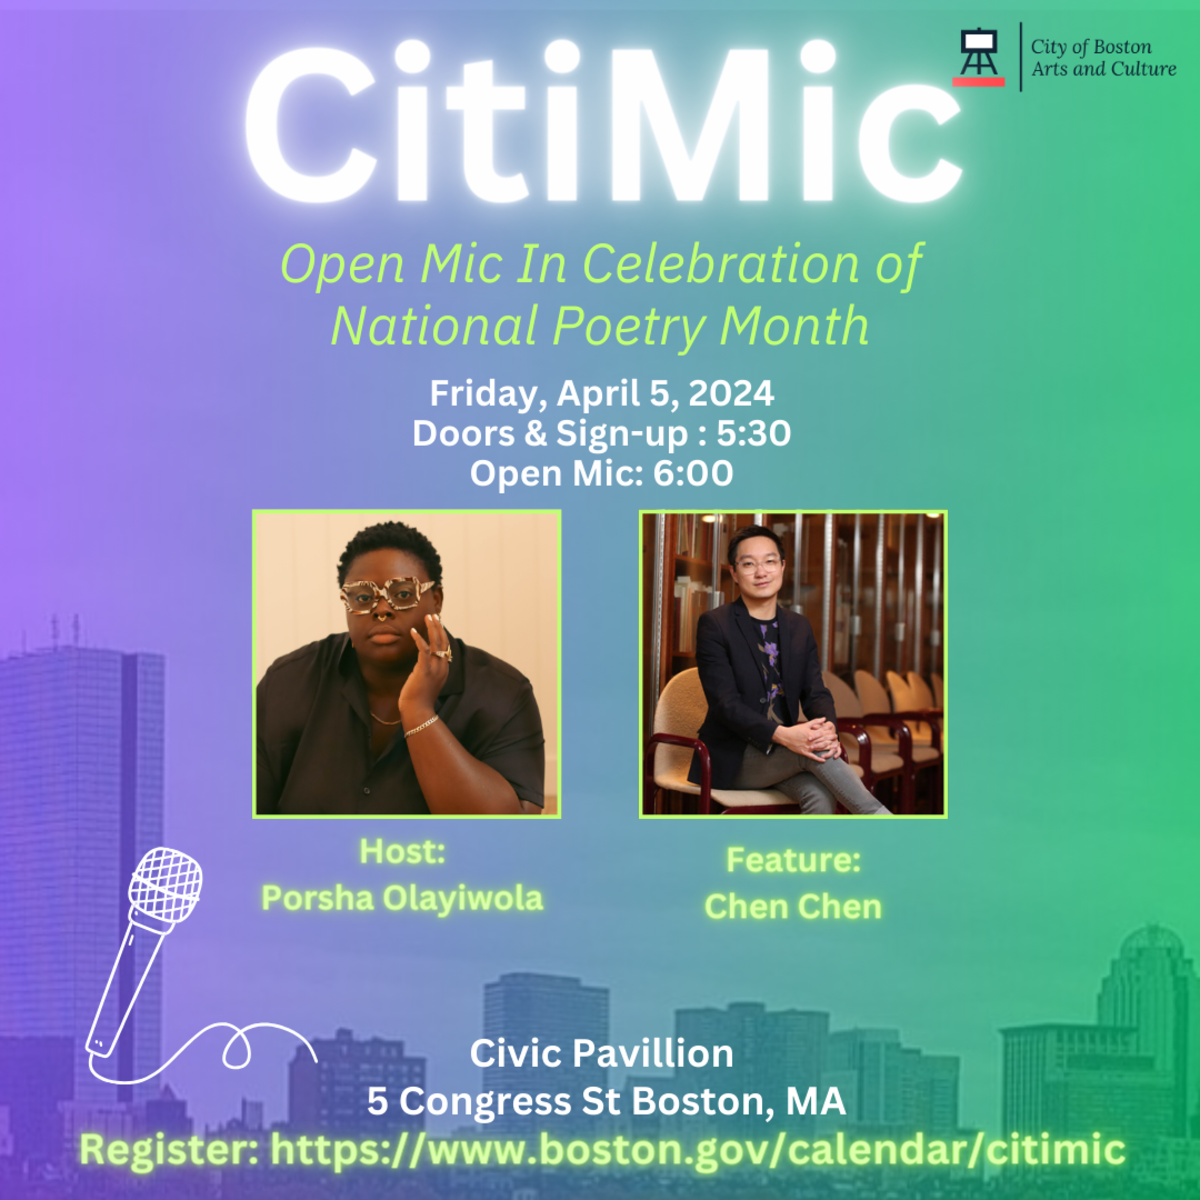 Graphic with text: "CitiMic: Open Mic in Celebration of National Poetry Month - Friday, April 5, 2024 - Doors & Sign-up: 5:30, Open Mic: 6:00. Host: Porsha Olayiwola, Feature: Chen Chen. Civic Pavilion 5 Congress St Boston MA. Register: boston.gov/calendar/citimic"